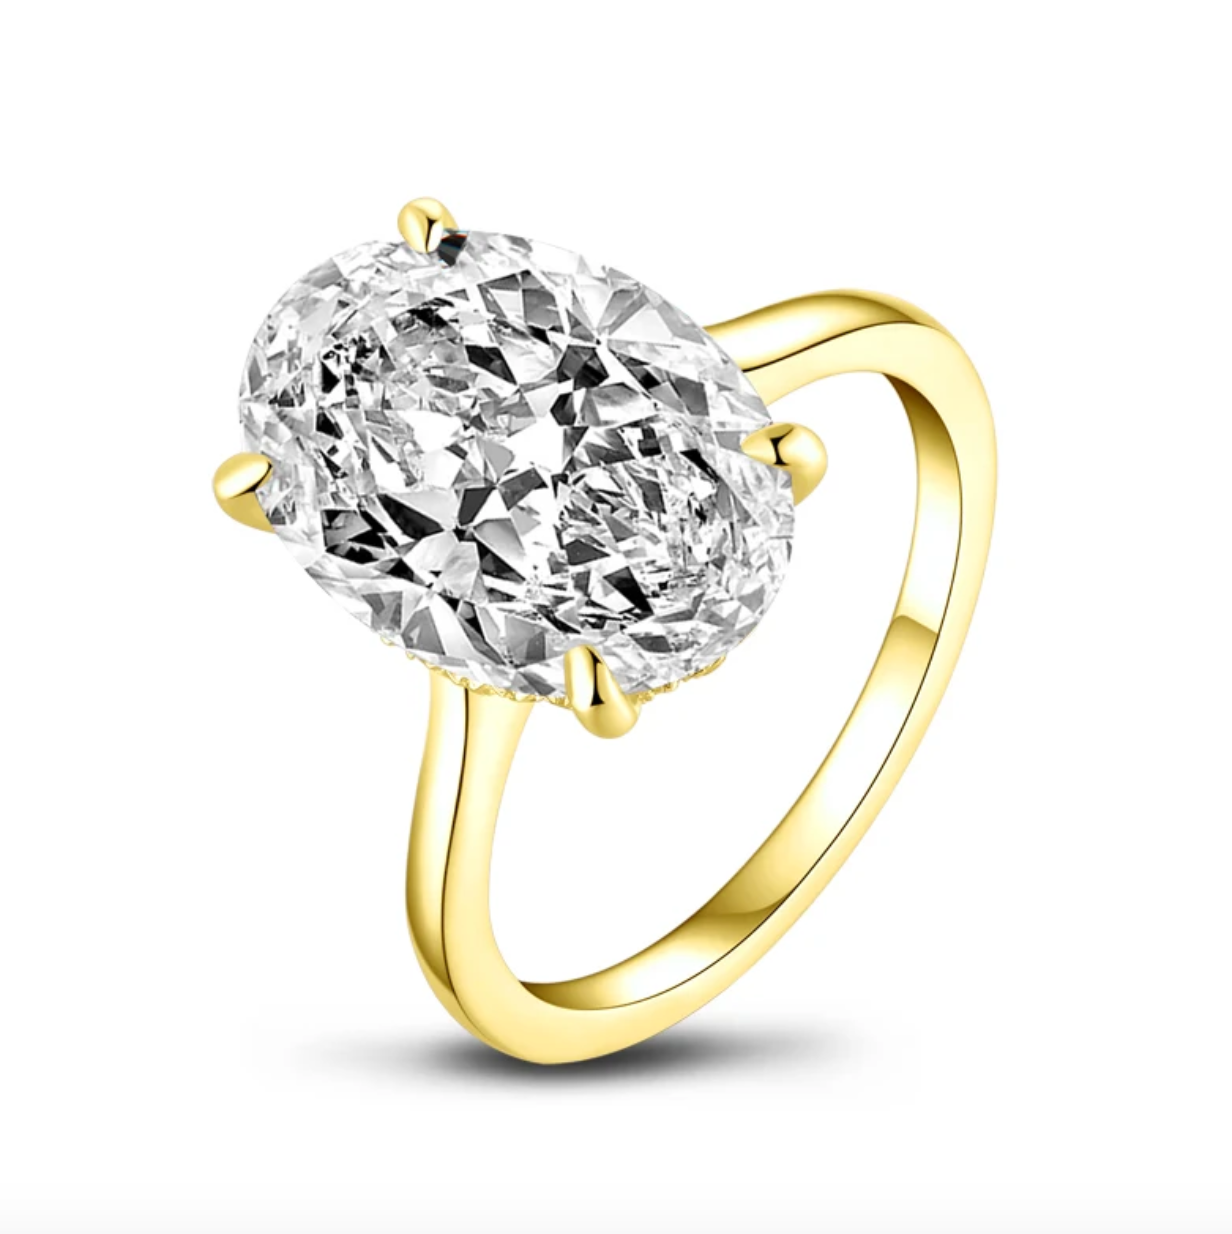 Hailey Bieber, Oval Cut Engagement Ring, 5 Carats, Gold